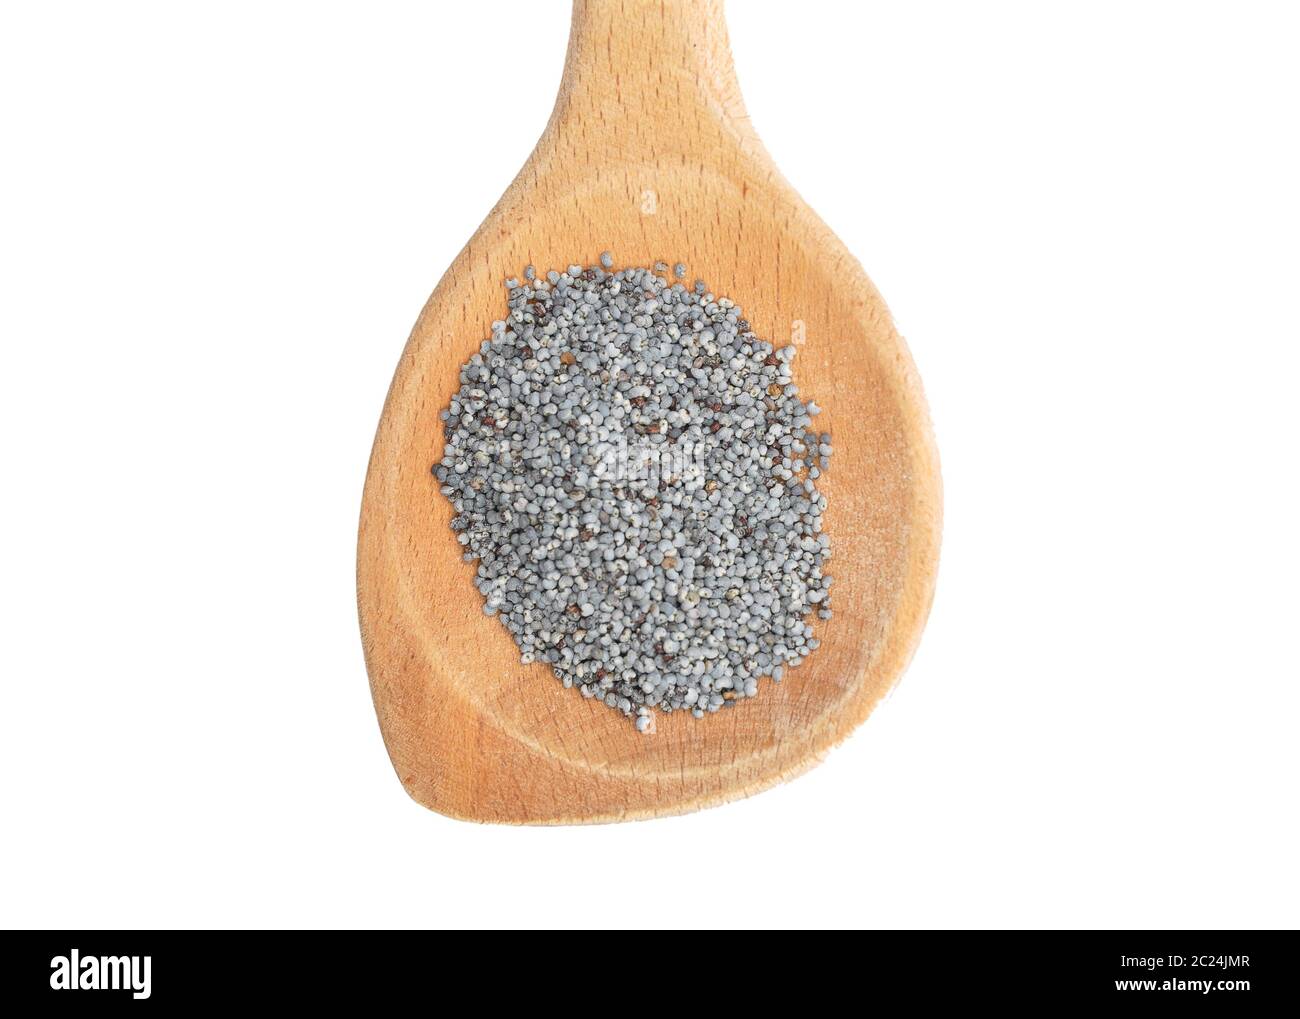 Poppy seeds on wooden spoon and white background Stock Photo